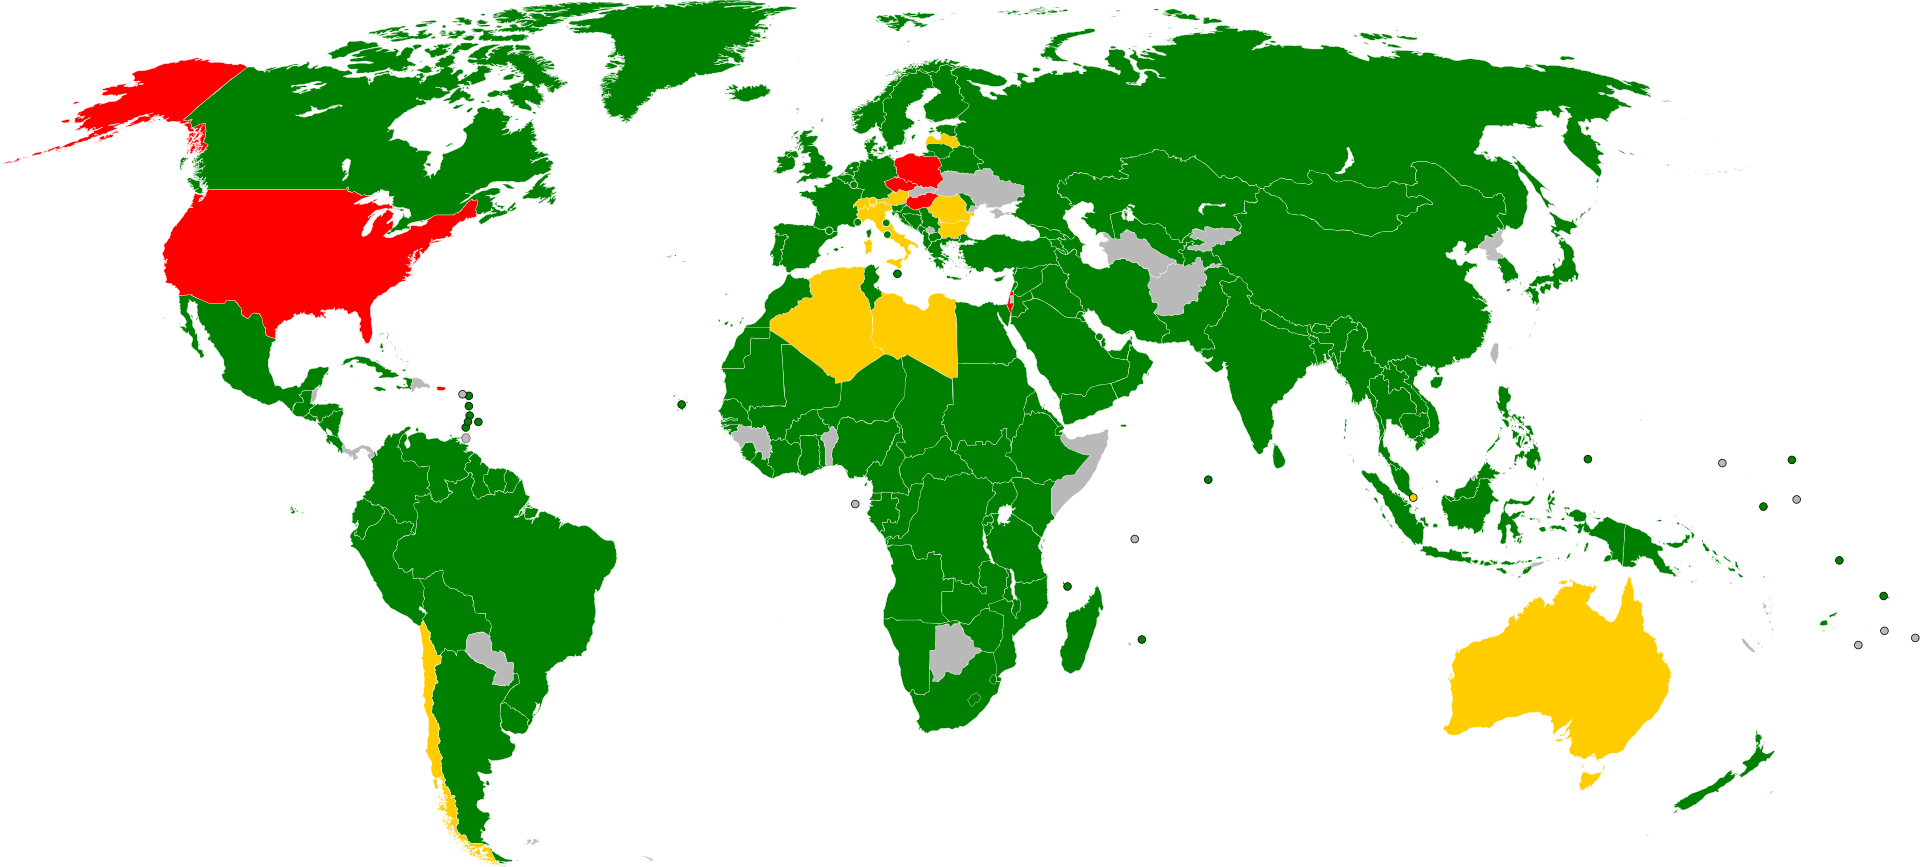 1920px-Global_Compact_for_Migration_UN_Assembly_vote_on_19_December_2018.svg.png